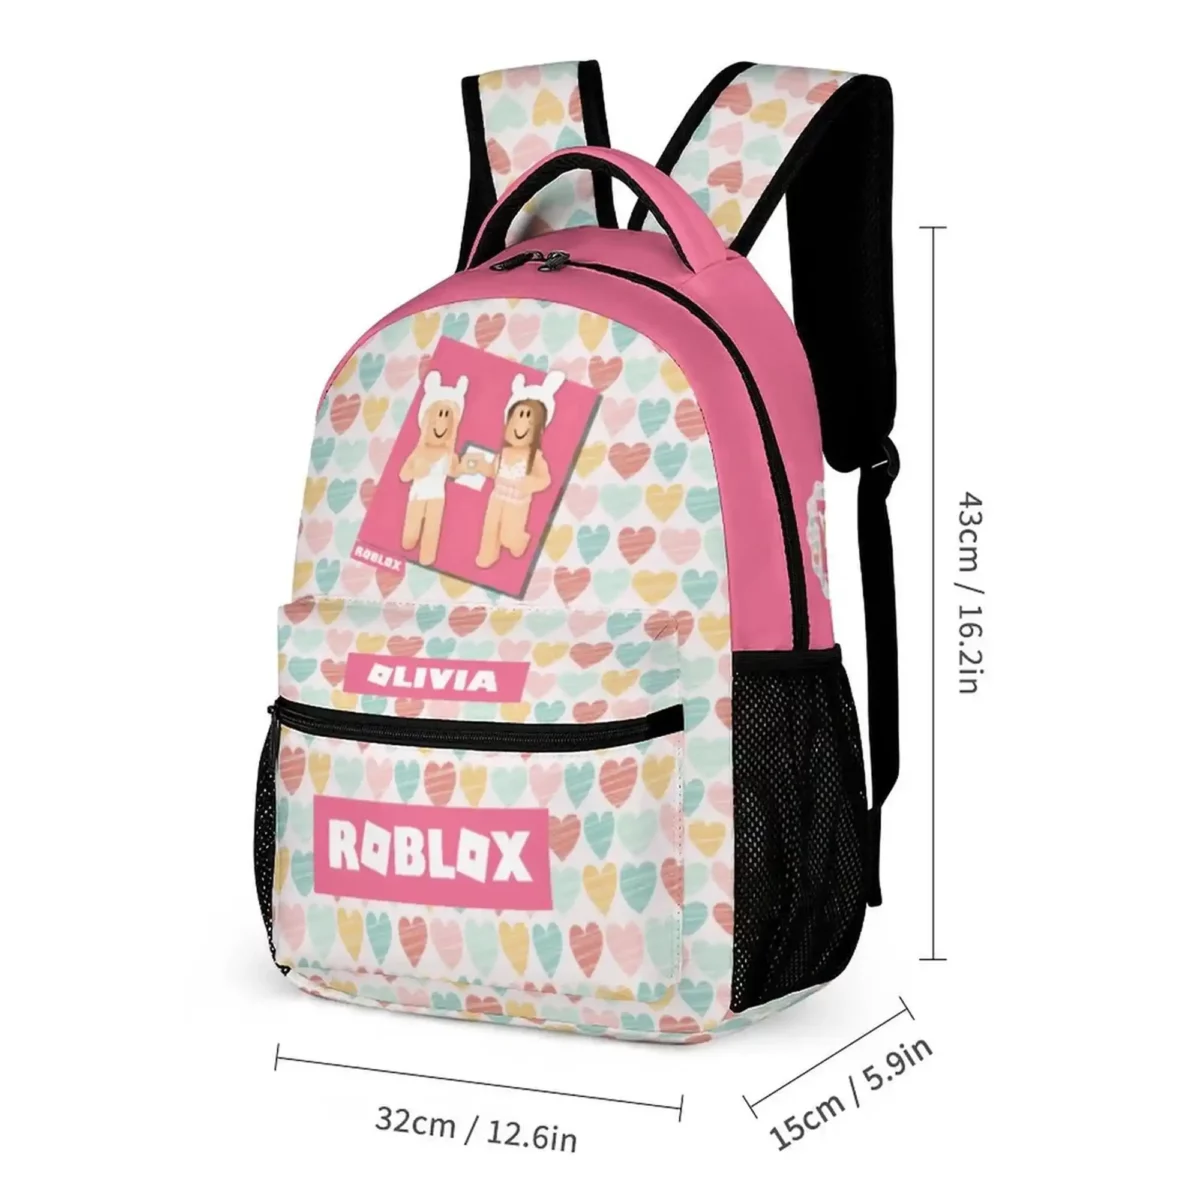 Personalized Roblox Girl’s Backpack with Pastel Hearts Background Cool Kiddo 18